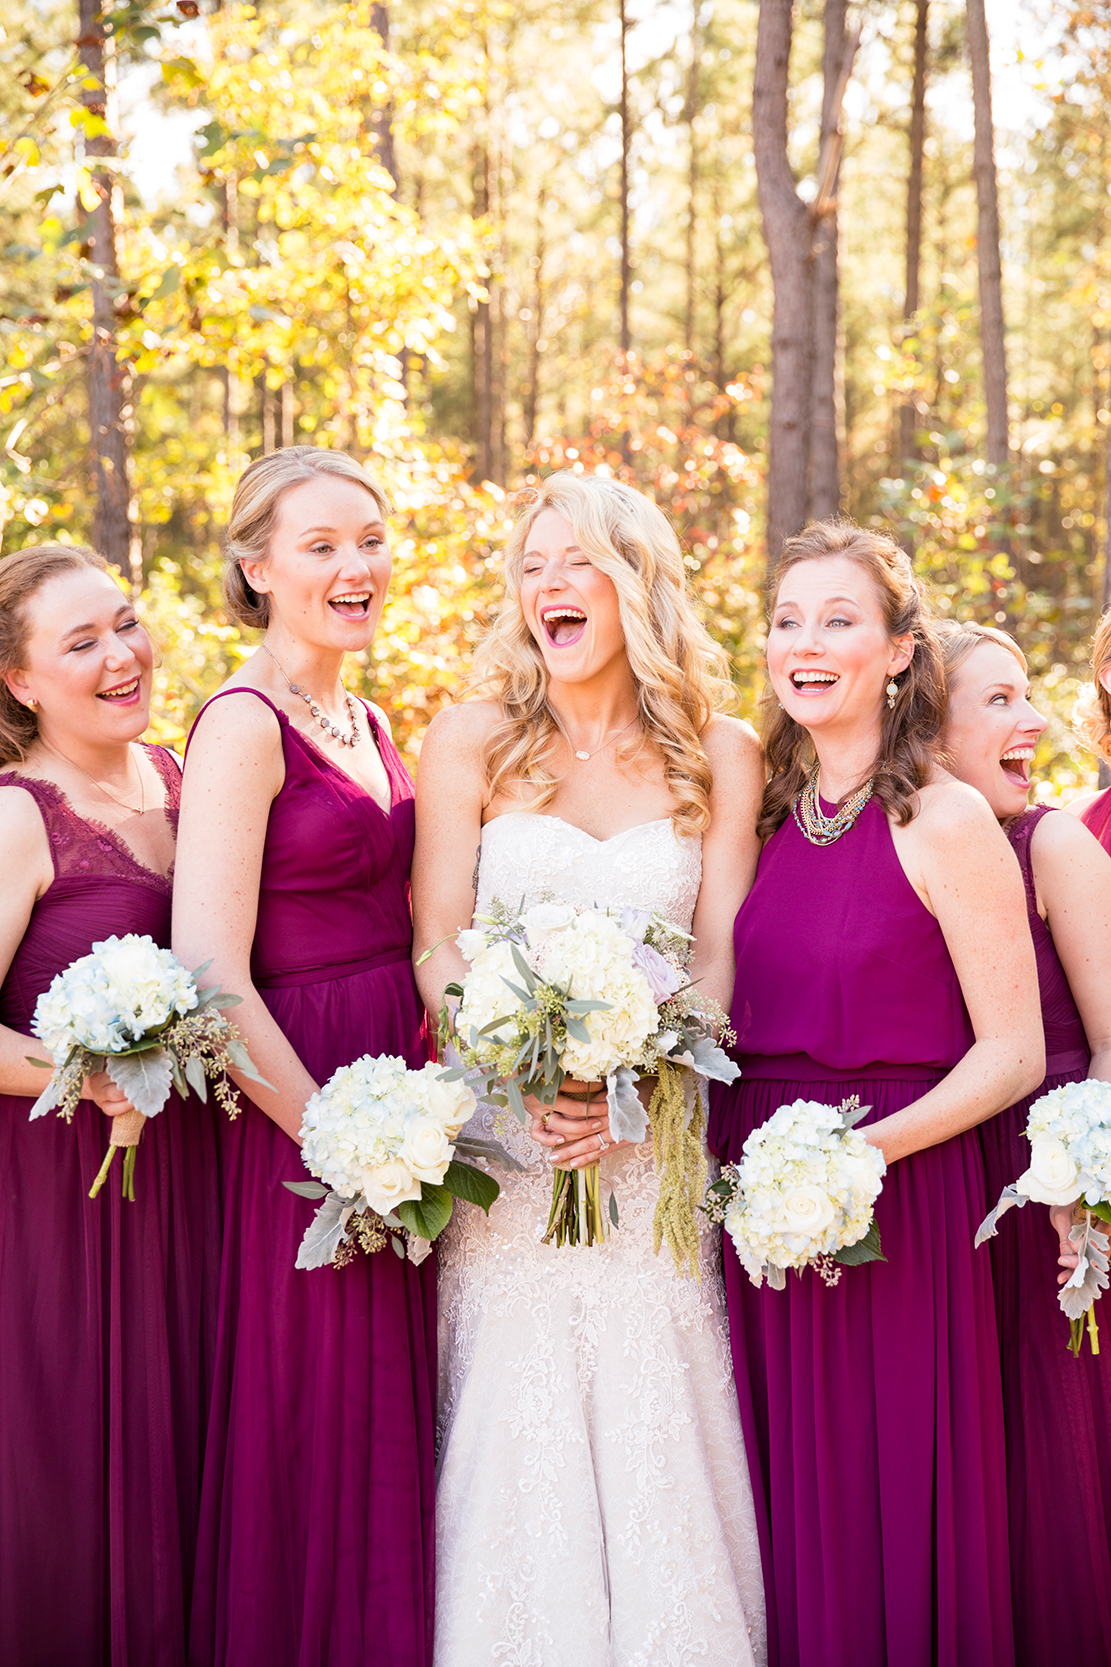 Best Places to Buy Bridesmaid Dresses - Image Property of www.j-dphoto.com